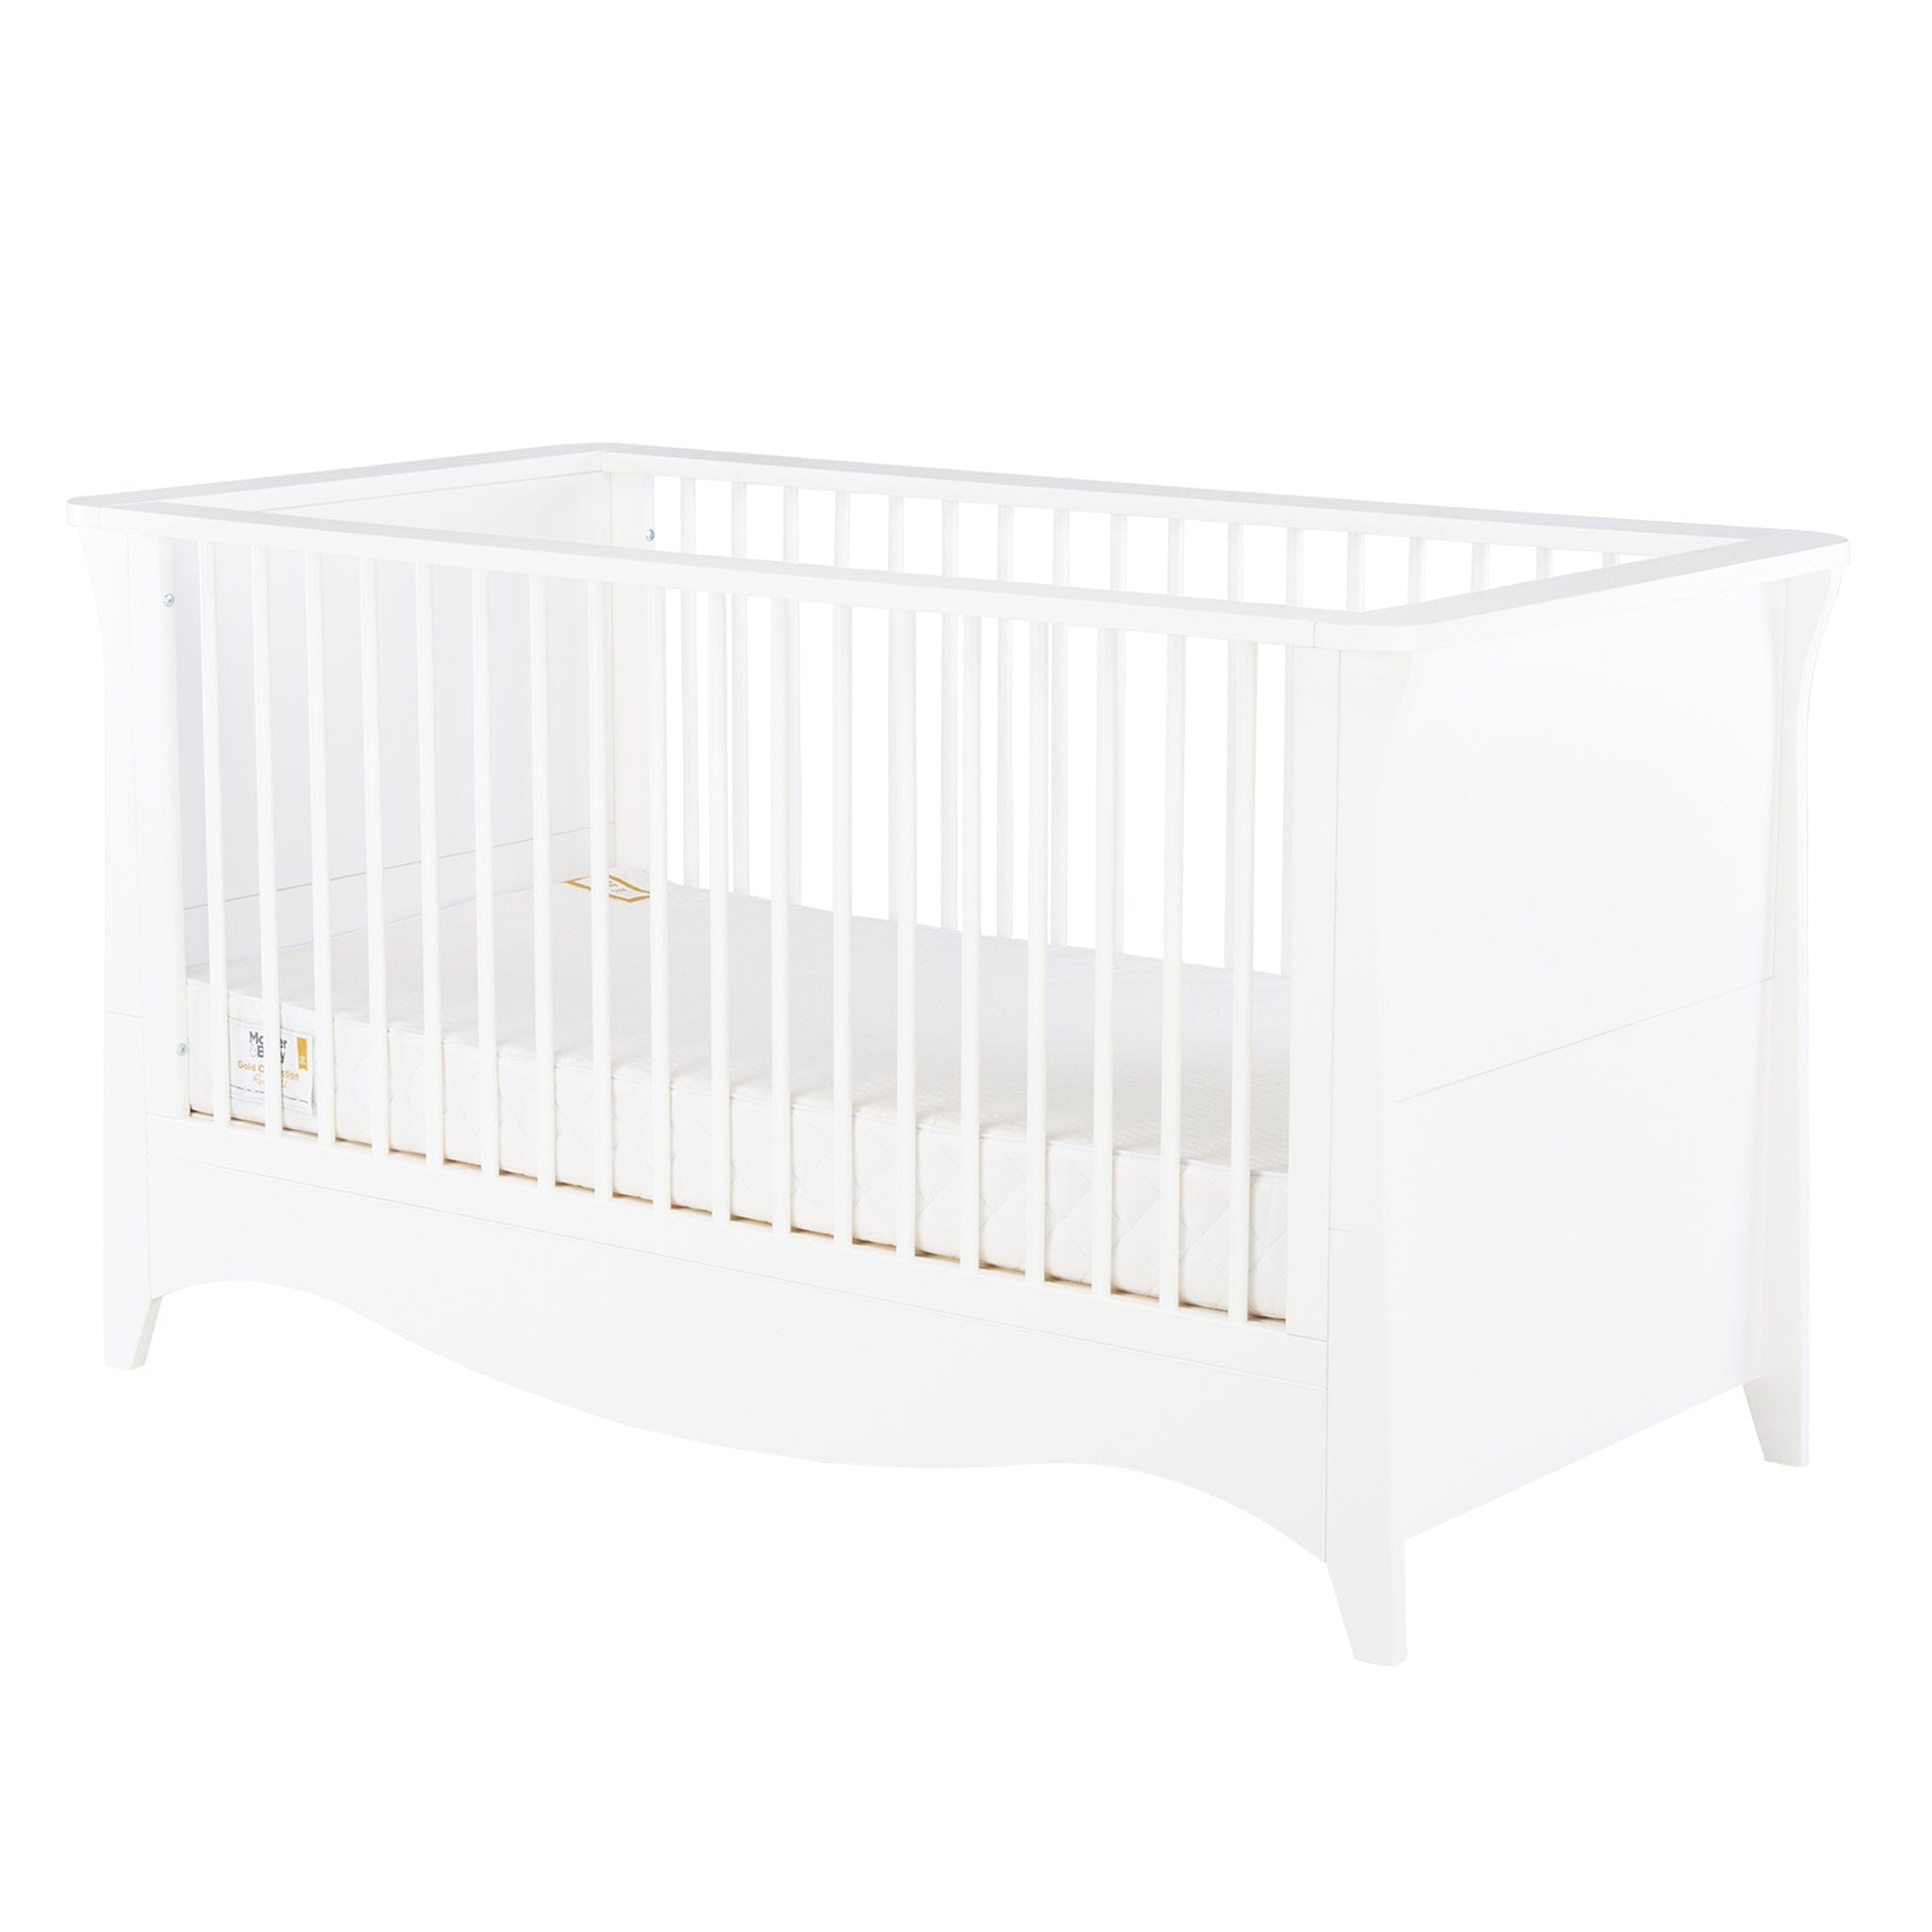 CuddleCo Clara 2 Piece Cot Bed Set in White Nursery Room Sets